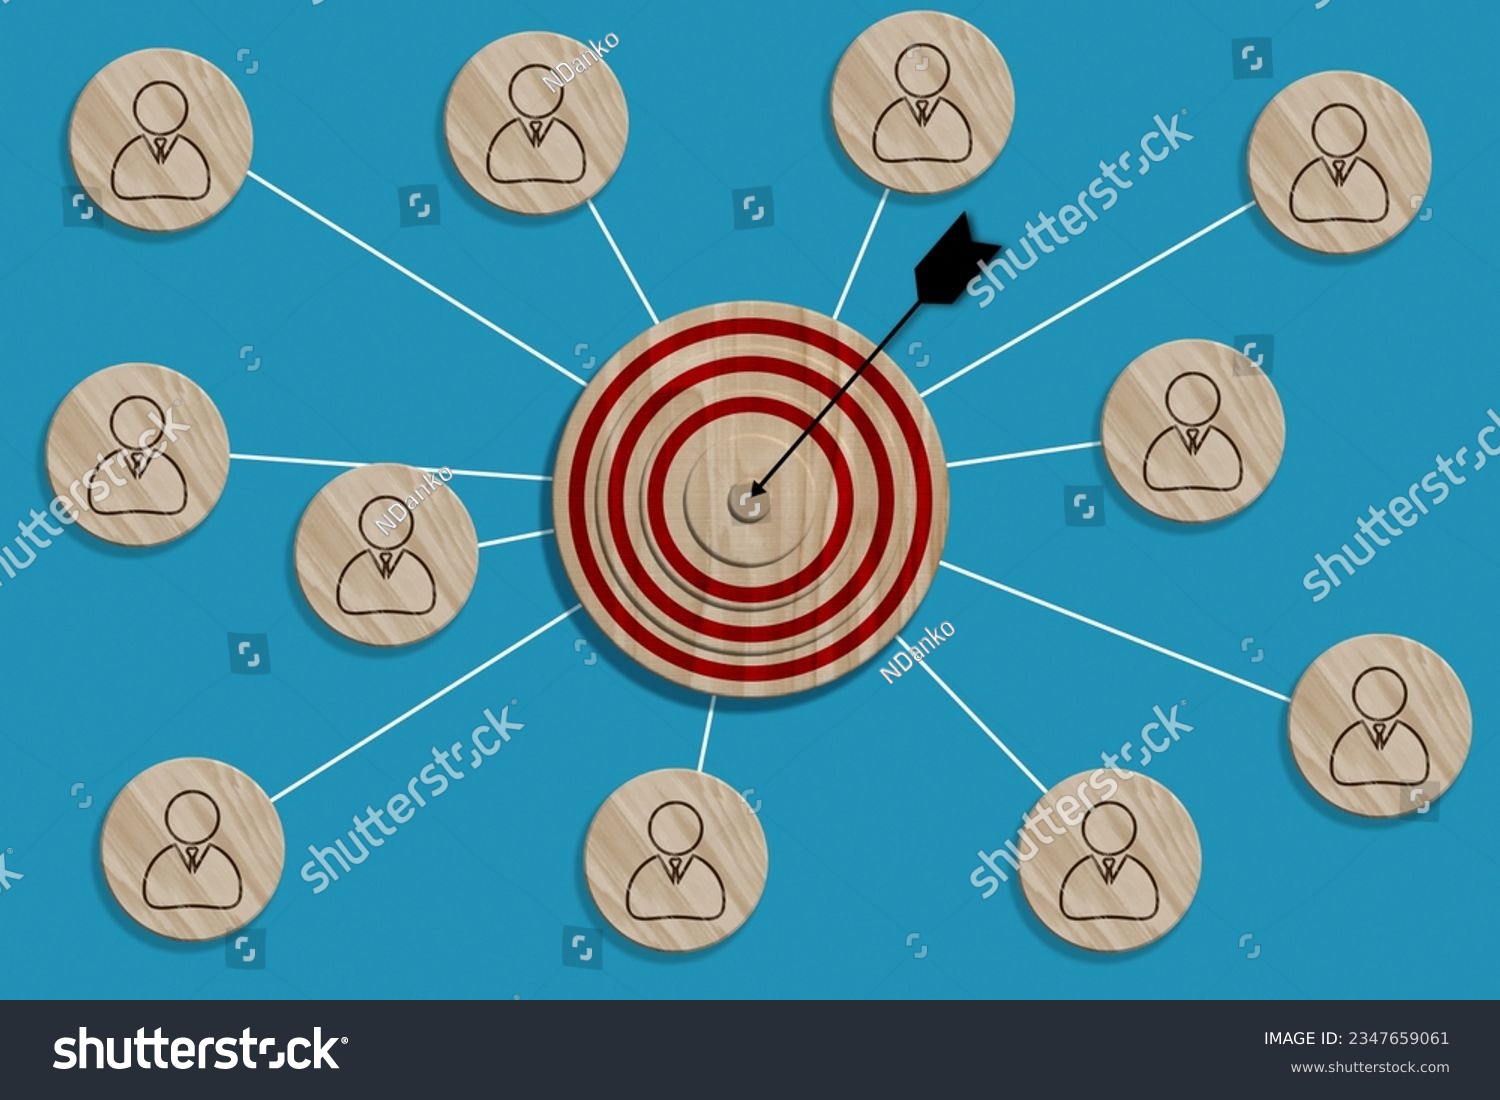 A wooden round target with an arrow and wooden plaques with a stick figure icon are connected, symbolizing the concept of target audience identification #2347659061